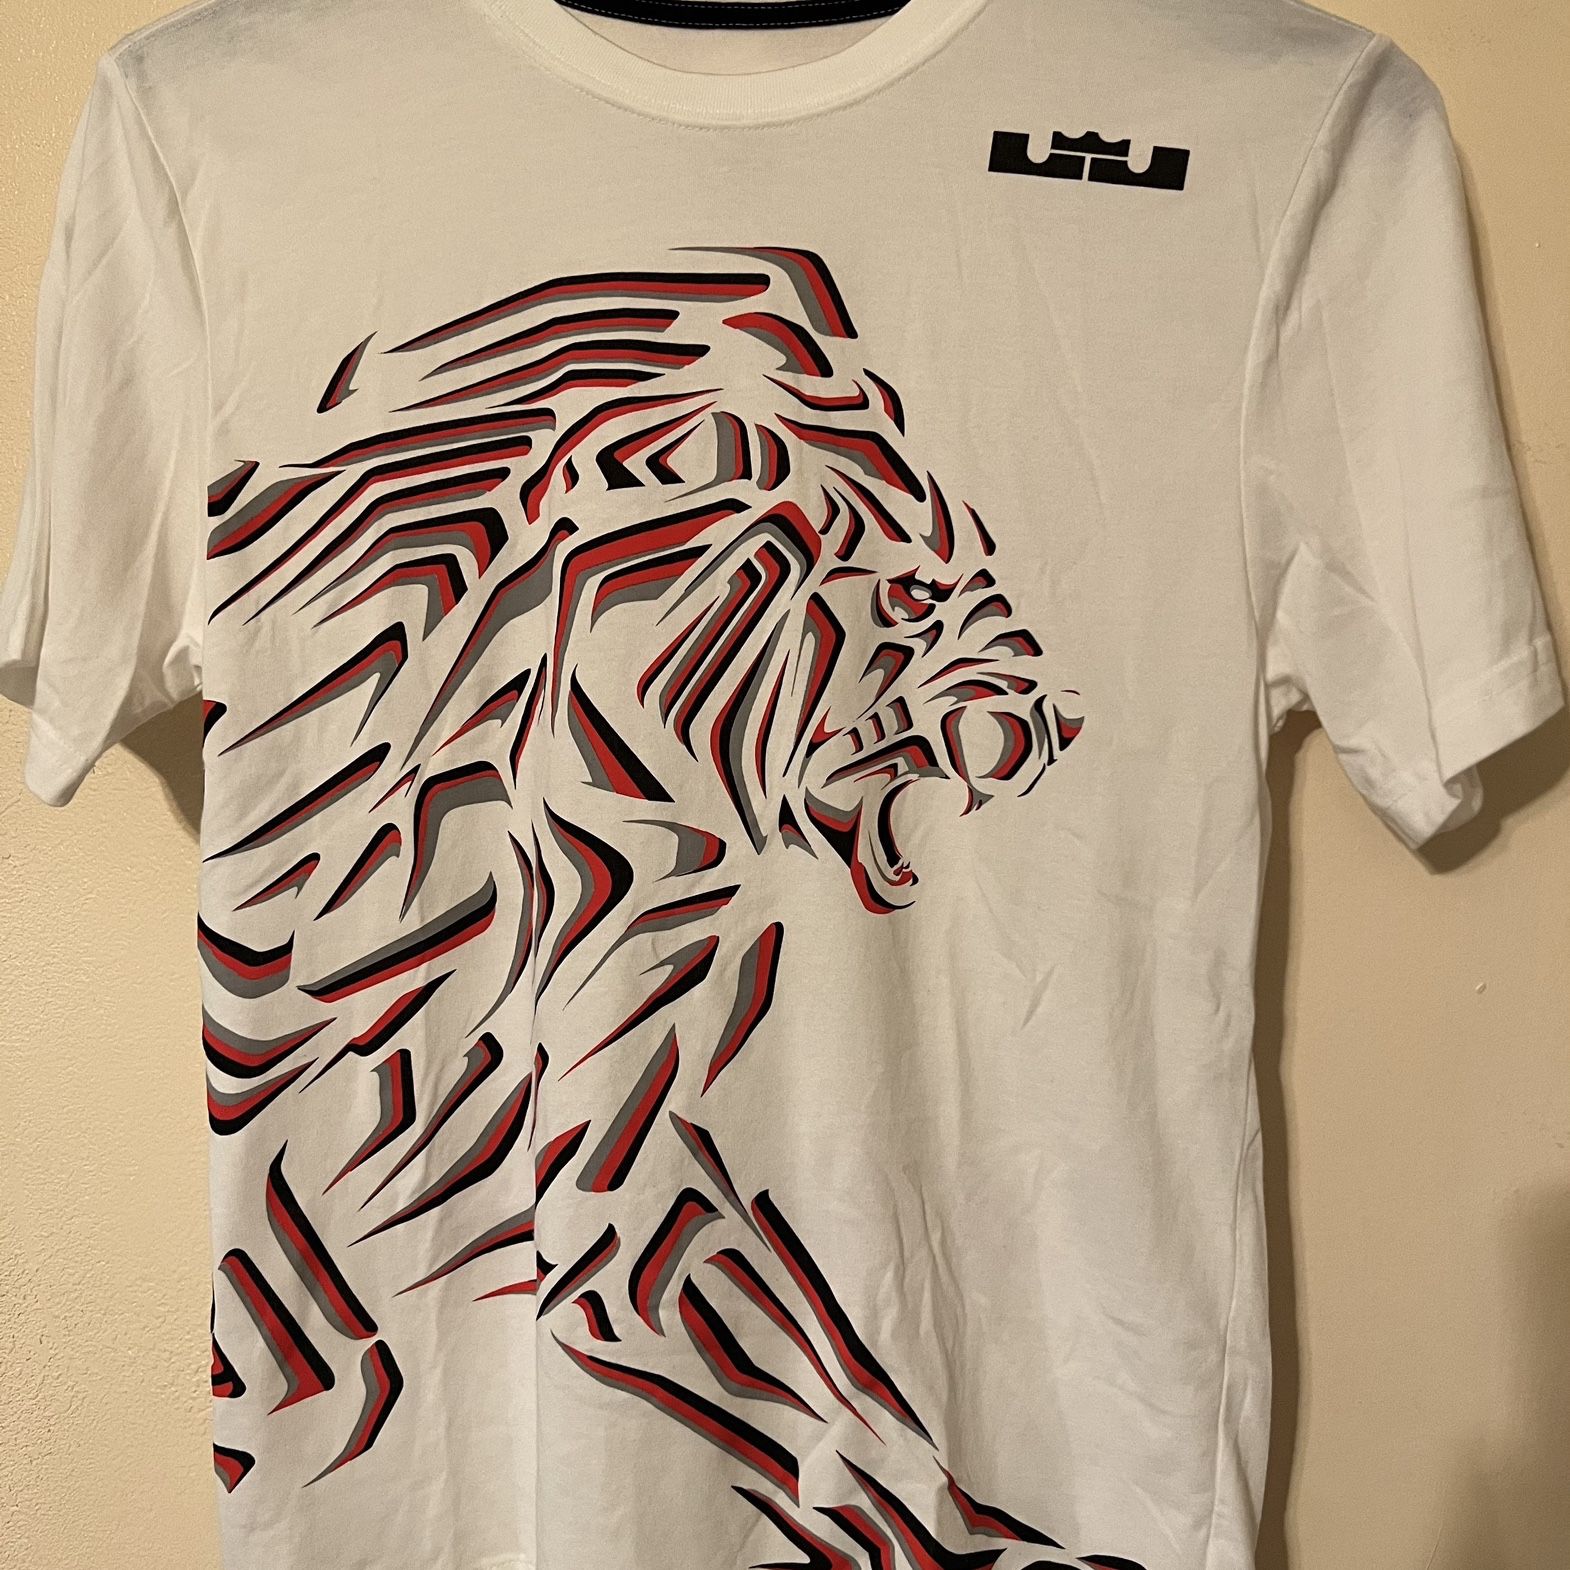 The Nike Tee Lebron James Lion T-Shirt Sz Small Dri-Fit Lightweight  Breathable